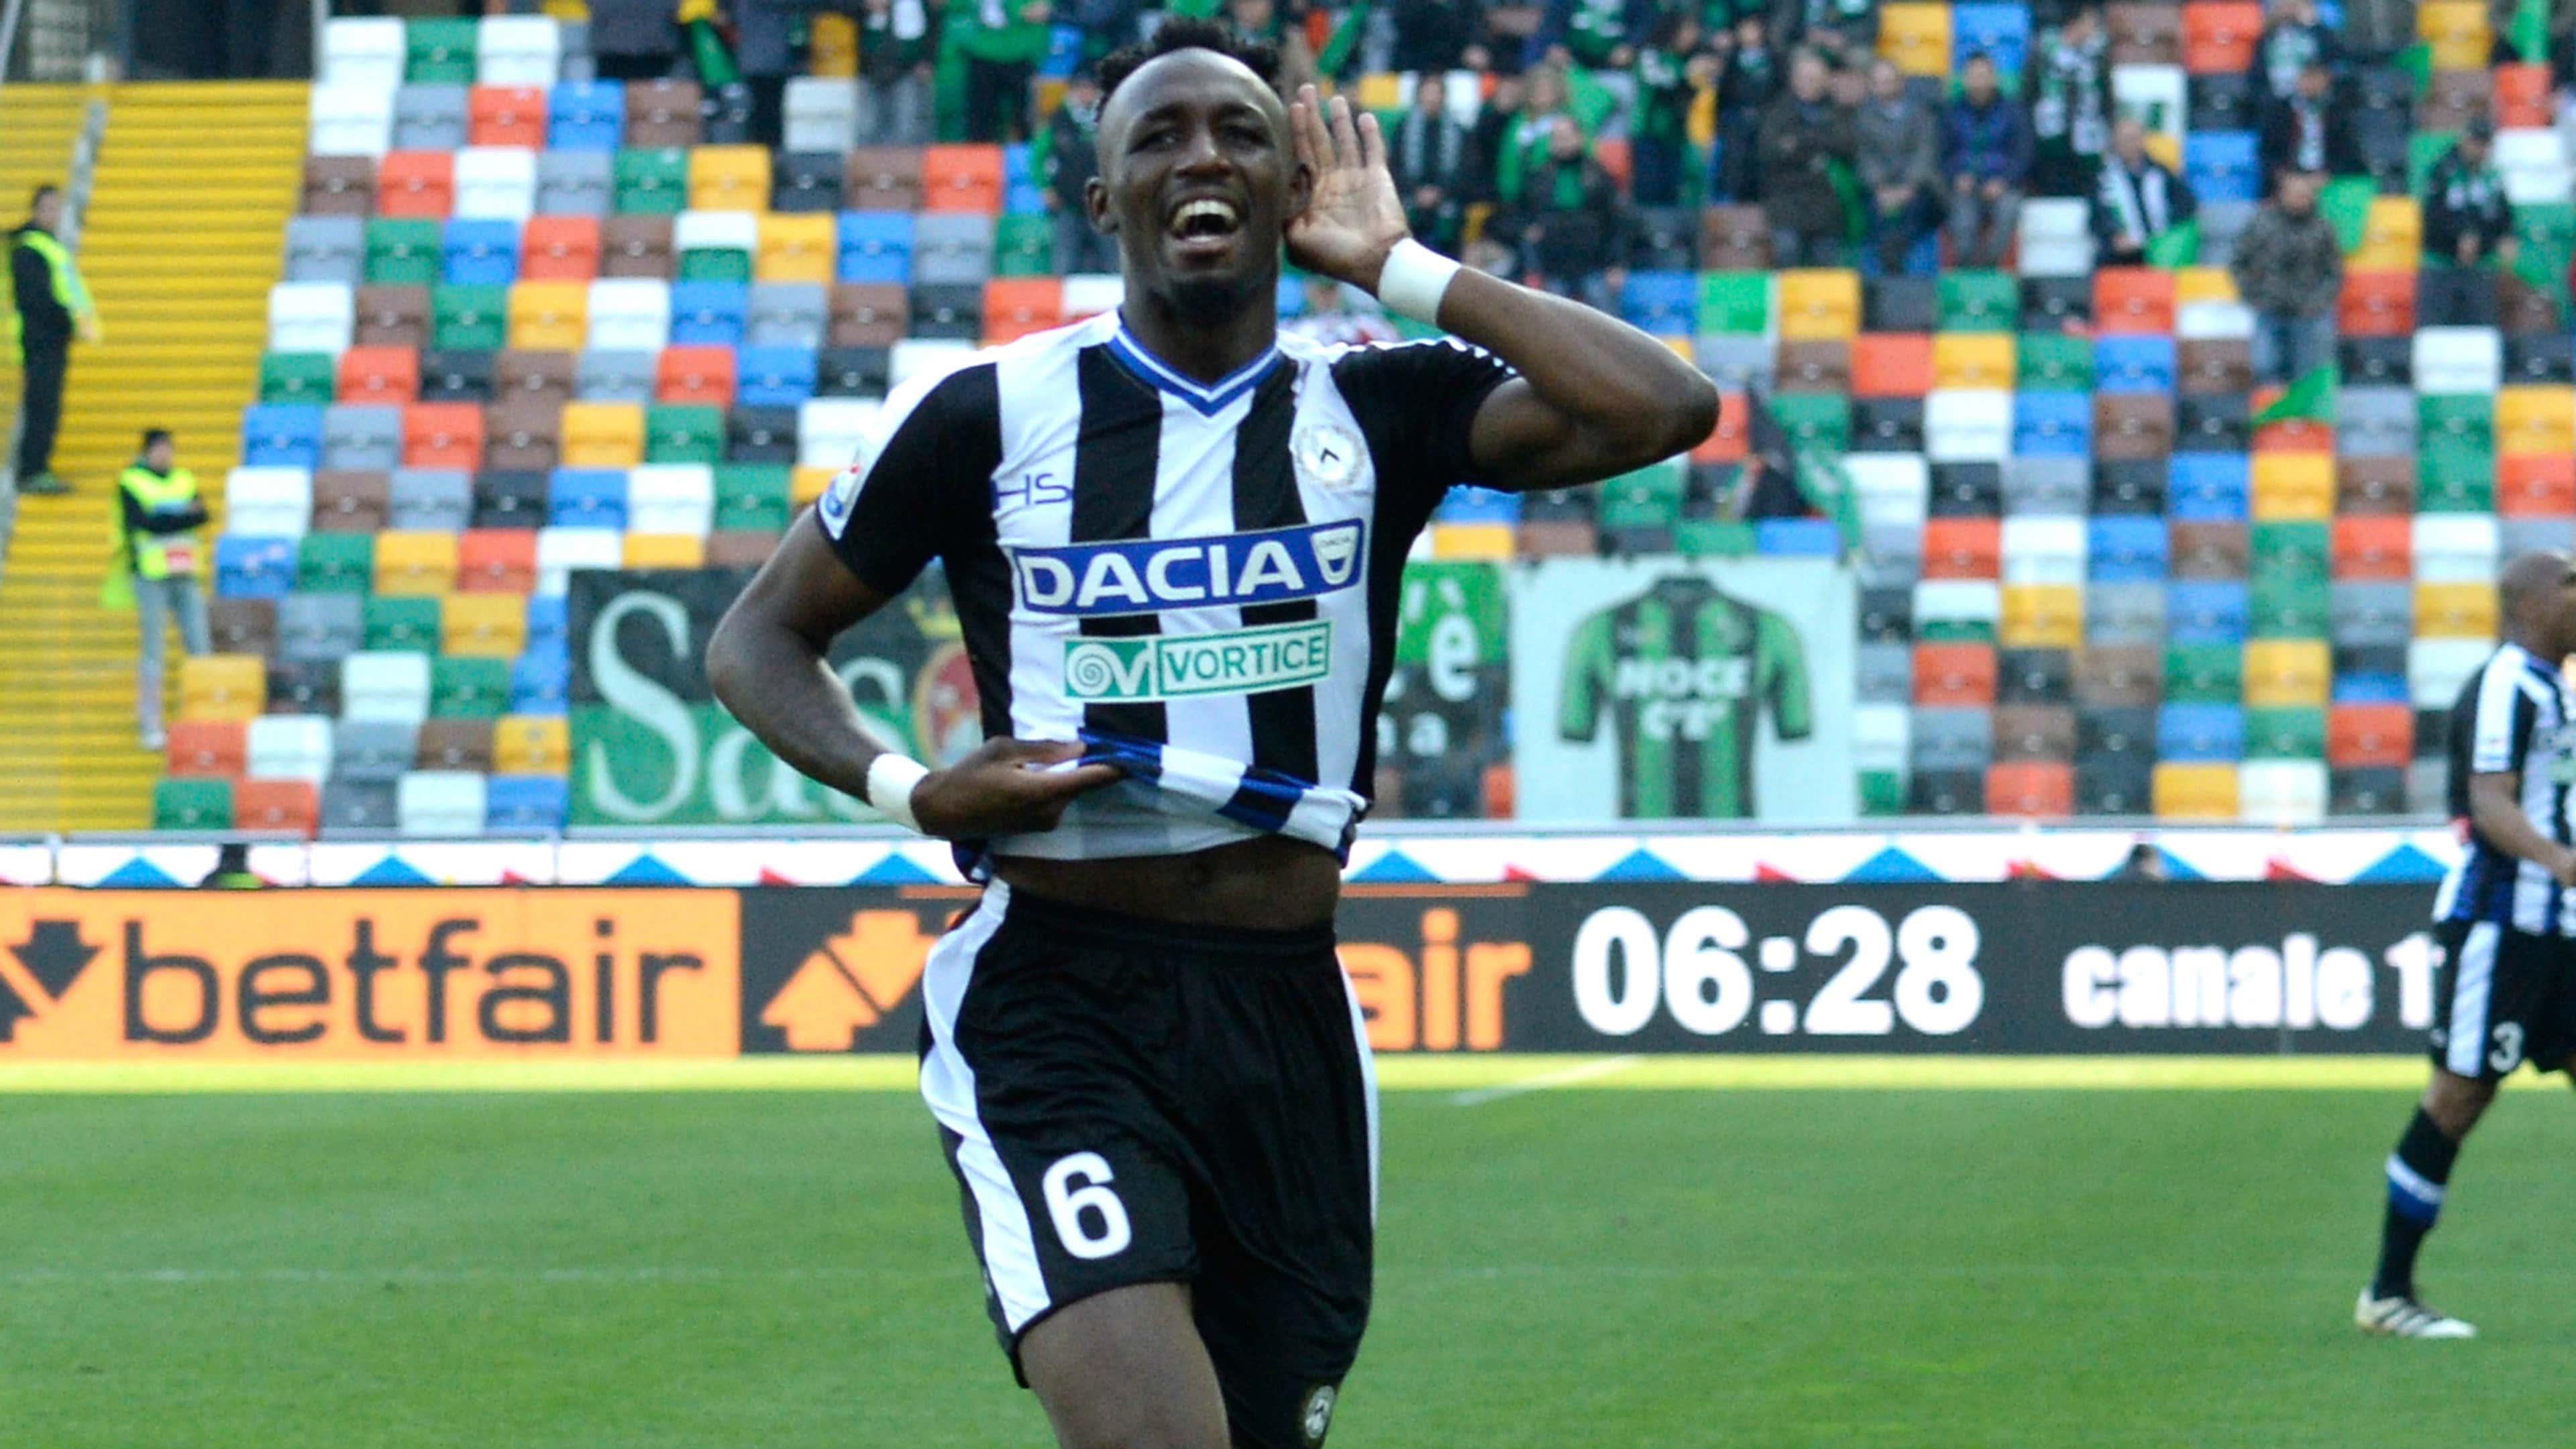 Fofana scores 2 as Udinese beats Palermo in Serie A